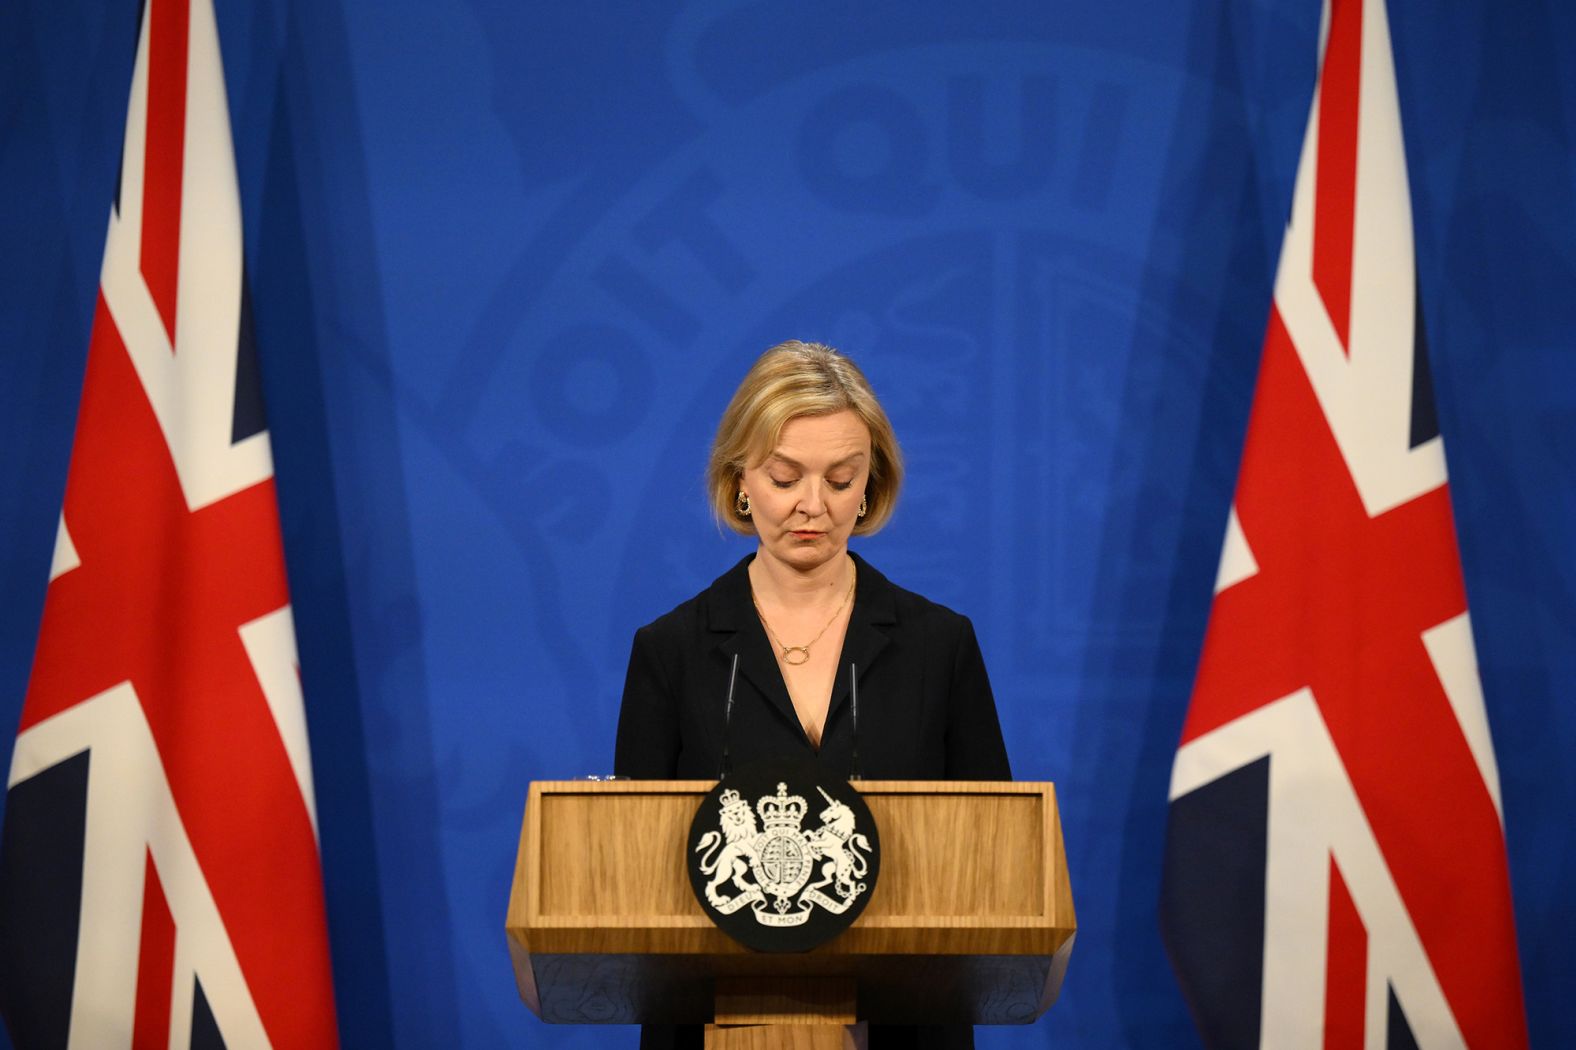 Truss holds a news conference in October 2022 after <a href="index.php?page=&url=https%3A%2F%2Fwww.cnn.com%2F2022%2F10%2F14%2Fuk%2Fliz-truss-tax-u-turn-trouble-analysis-intl-gbr%2Findex.html" target="_blank">sacking Kwarteng.</a> Asked whether she would say sorry to her party's lawmakers, some of whom were publicly trashing her economic agenda, she replied: "I am determined to deliver on what I set out when I campaigned to be party leader. We need to have a high-growth economy but we have to recognize that we are facing very difficult issues as a country."